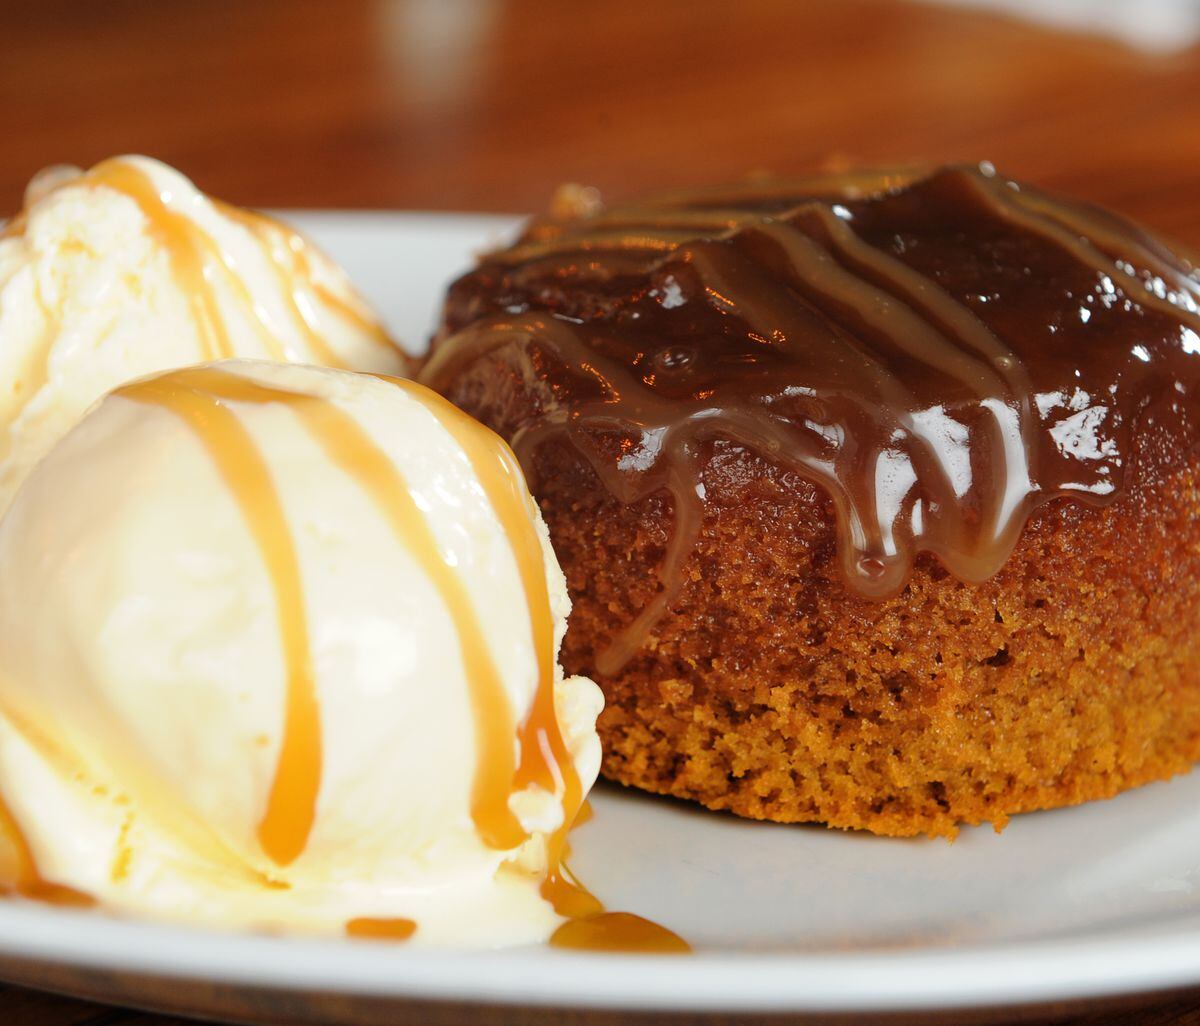 Sticky Toffee pudding was a real treat